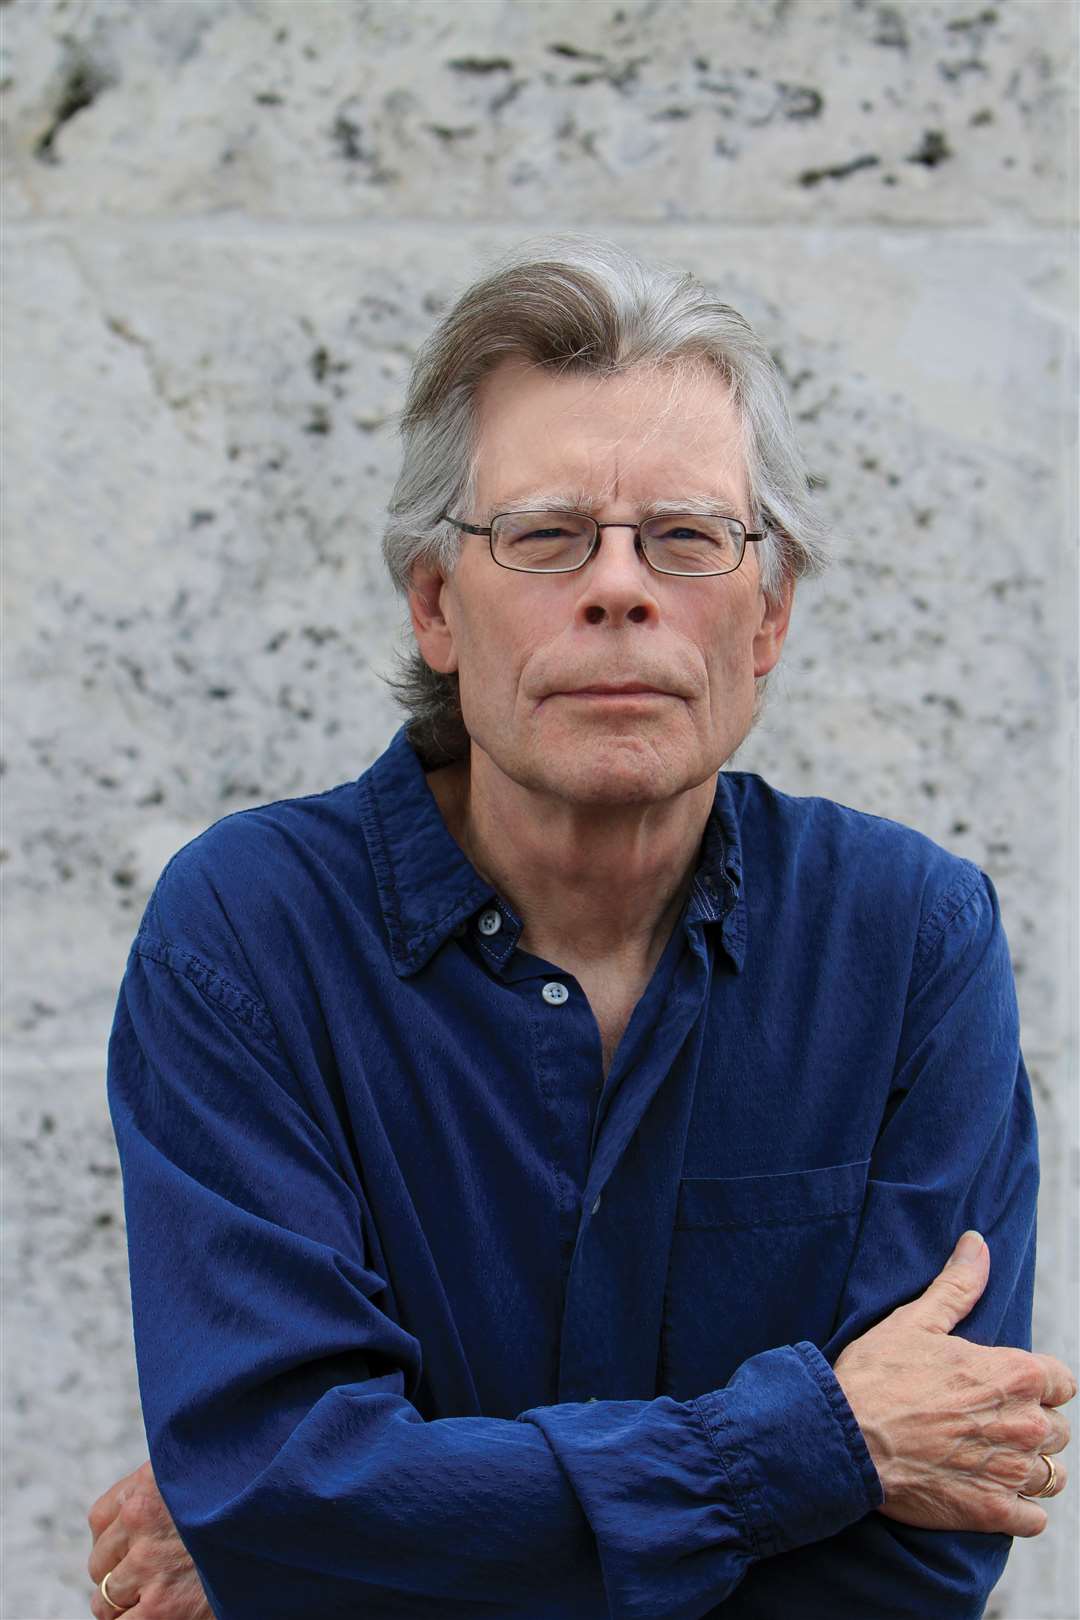 Stephen King will give a rare interview remotely for the 2022 Cheltenham Literature Festival (Shane Leonard/Cheltenham Literature Festival/PA)